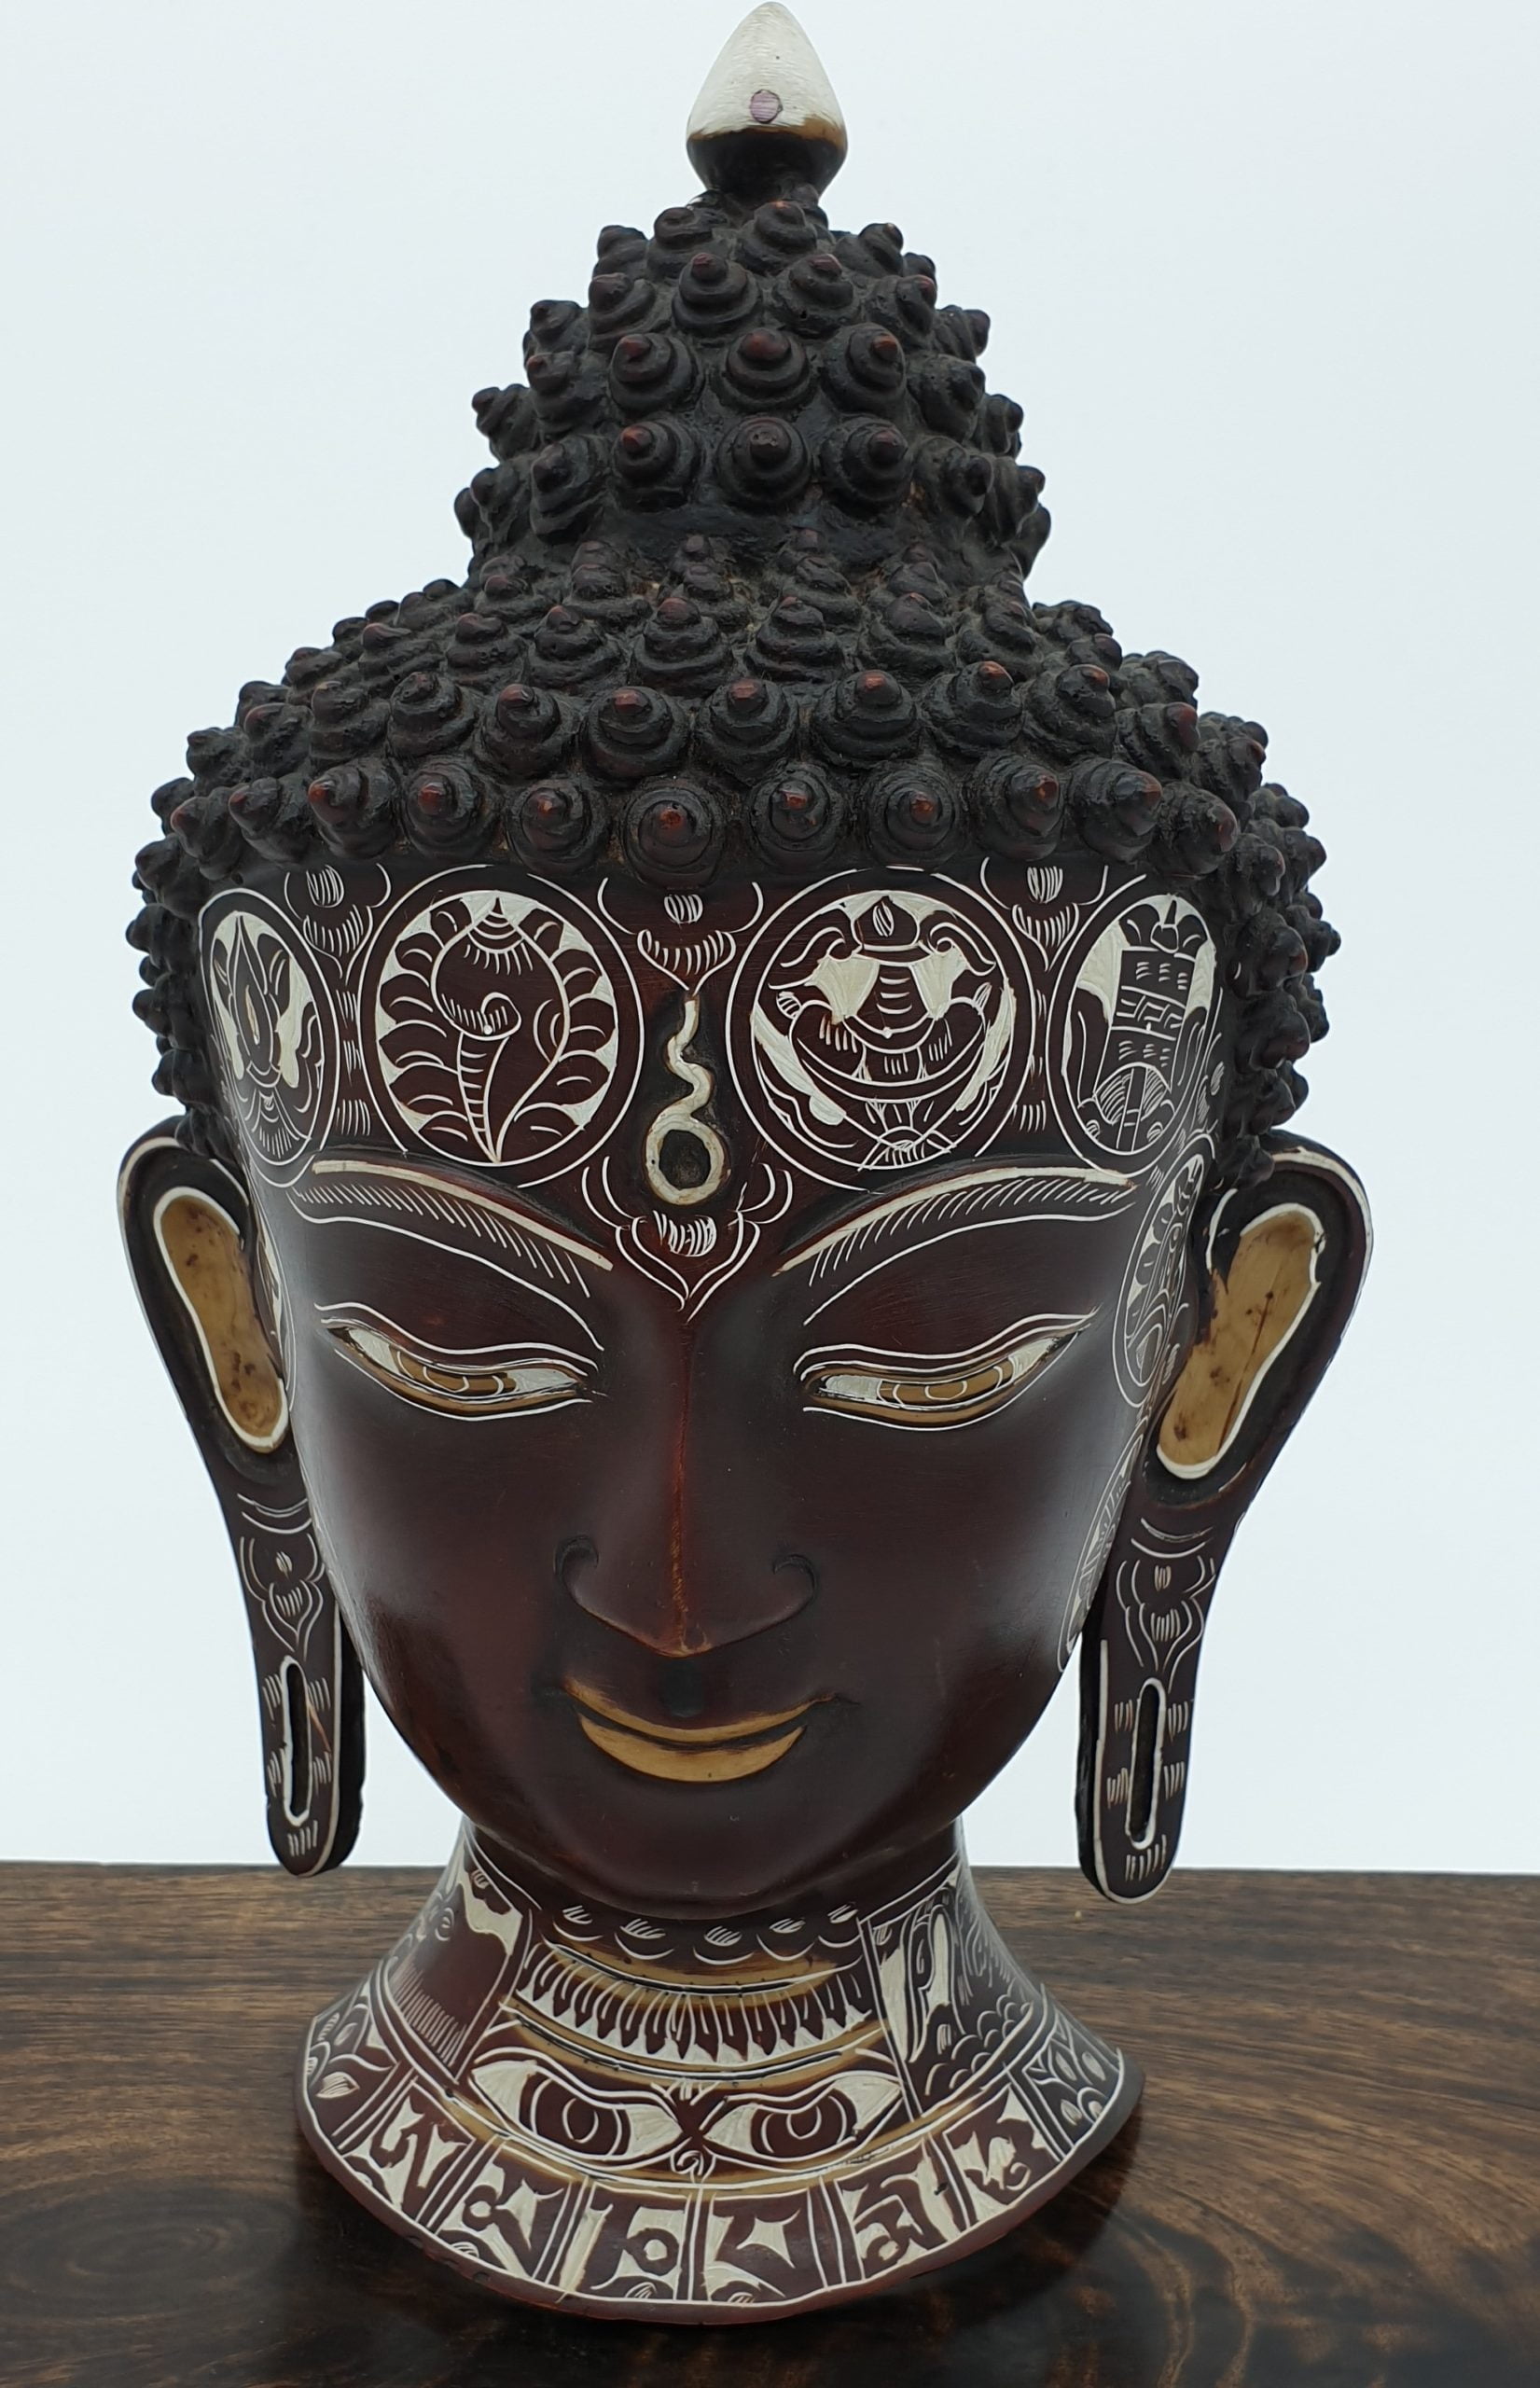 Carved Buddha Head Mask Wall Hanging - Ceramic, Hand Engraved